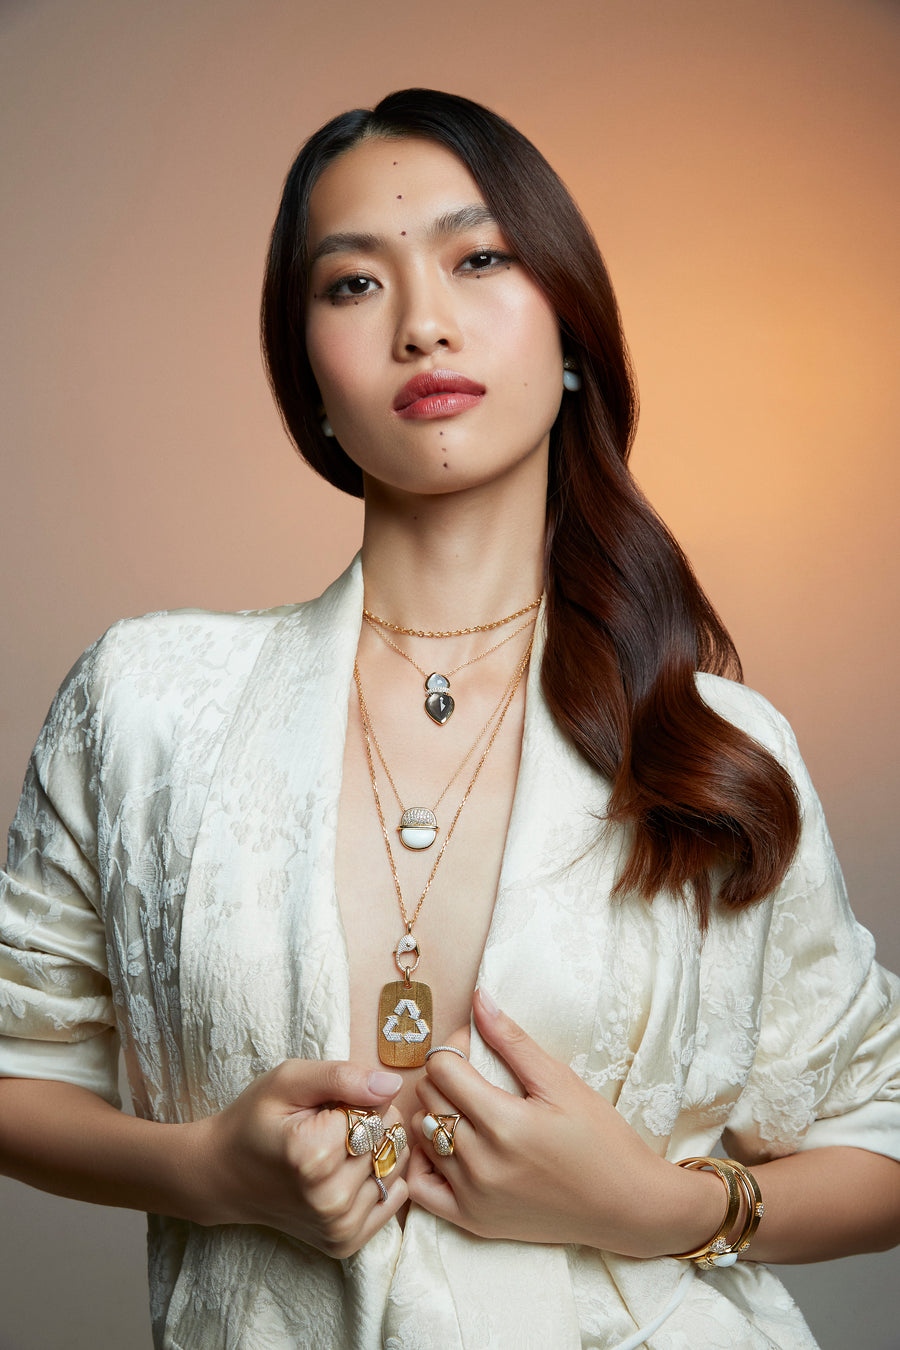 Amrita Lotus Duplet Necklace in Mother of Pearl, White and Smokey Quartz